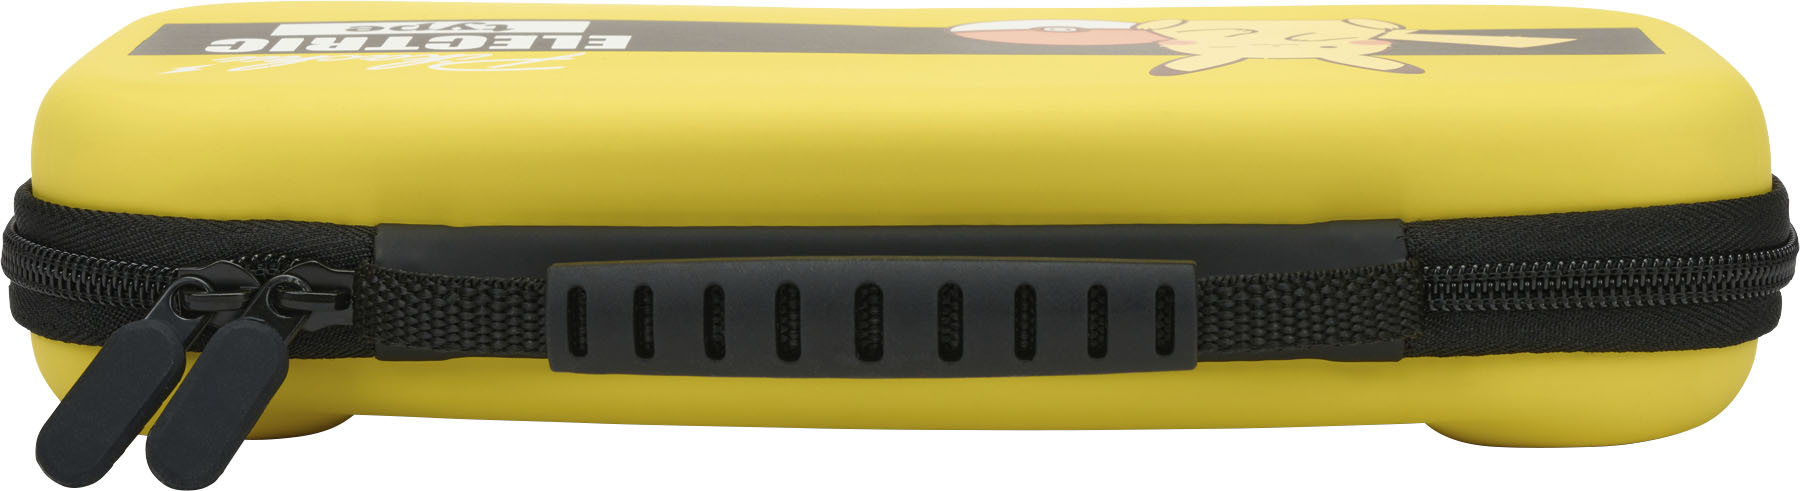 Back View: PowerA - Protection Case for Nintendo Switch - OLED Model, Nintendo Switch or Nintendo Switch Lite - Pikachu Electric Type